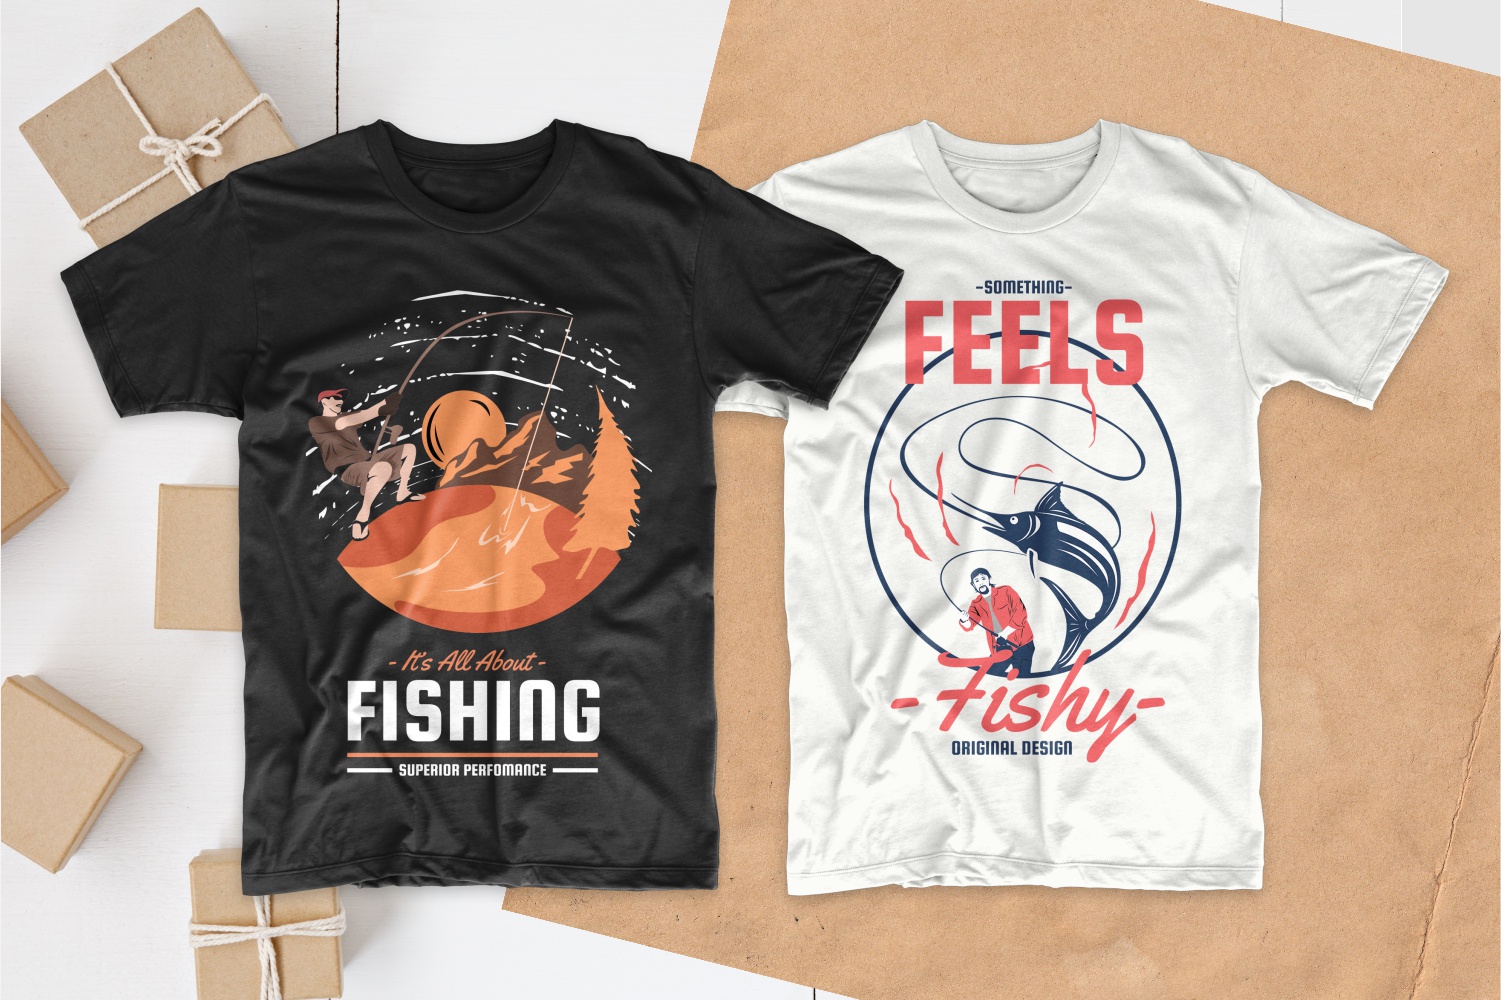 Black and white T-shirts with a picture of a fisherman trying to pull out a big fish.